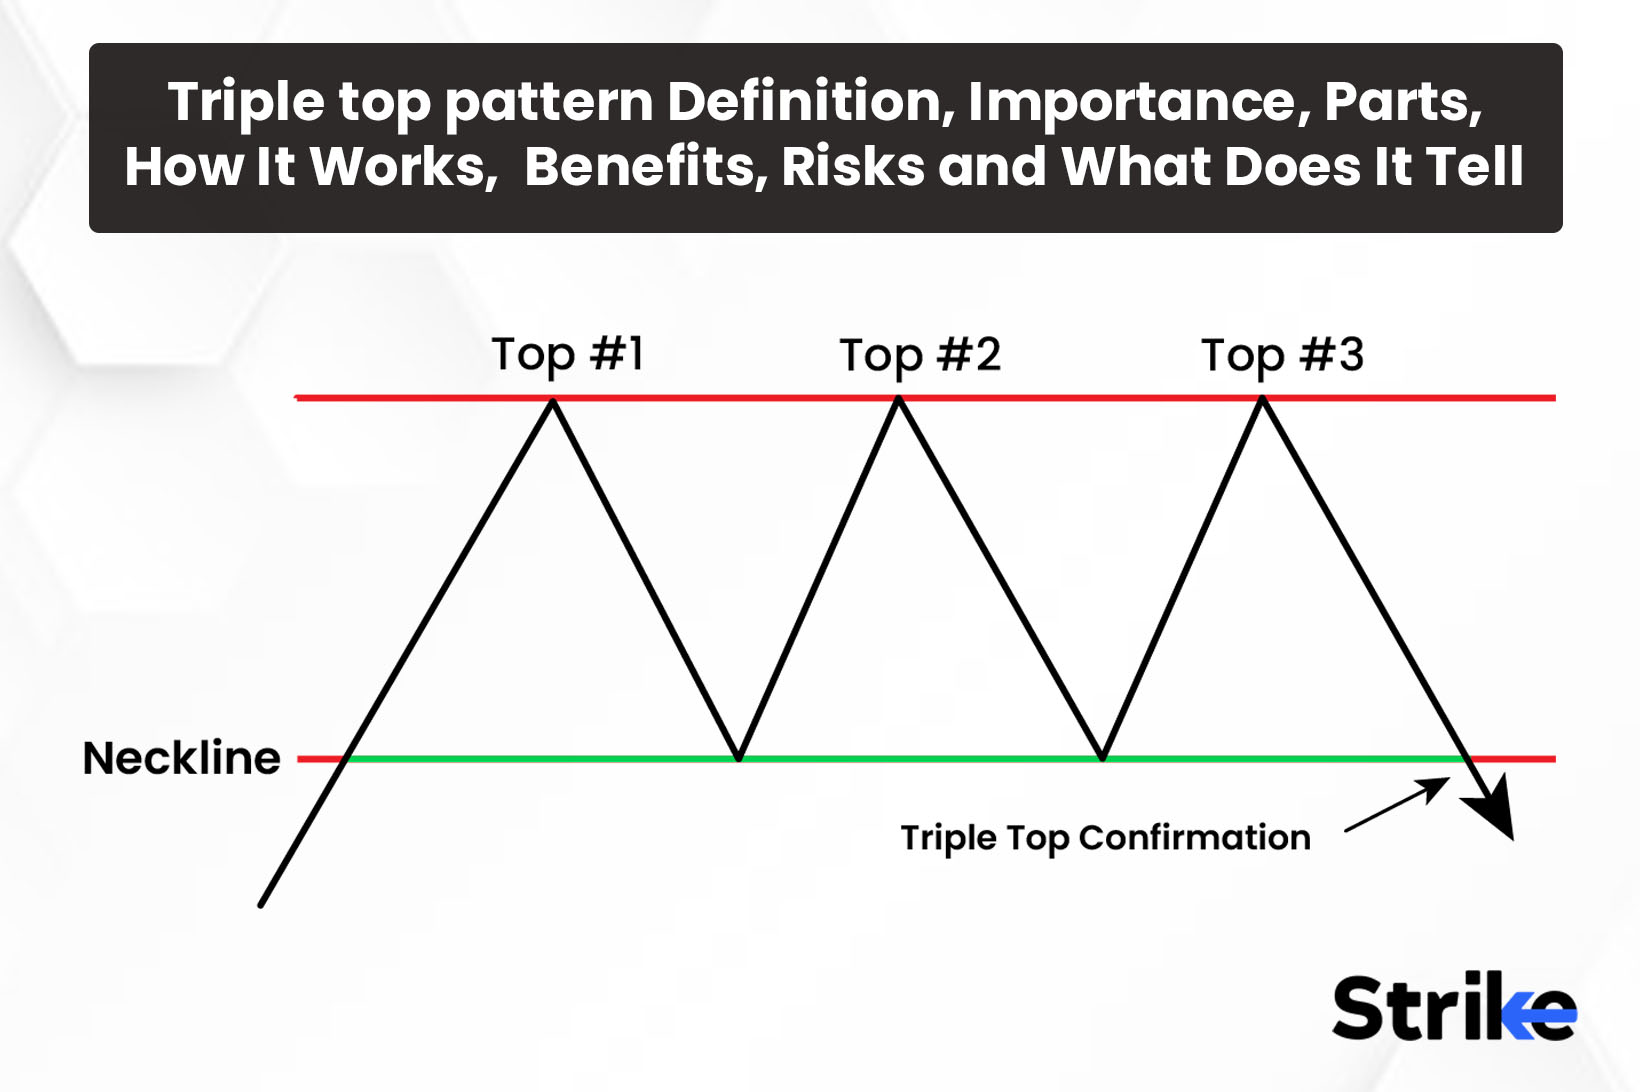 Triple top pattern: Definition, Importance, Parts, How It Works, Benefits, Risks, and What Does It Tell?